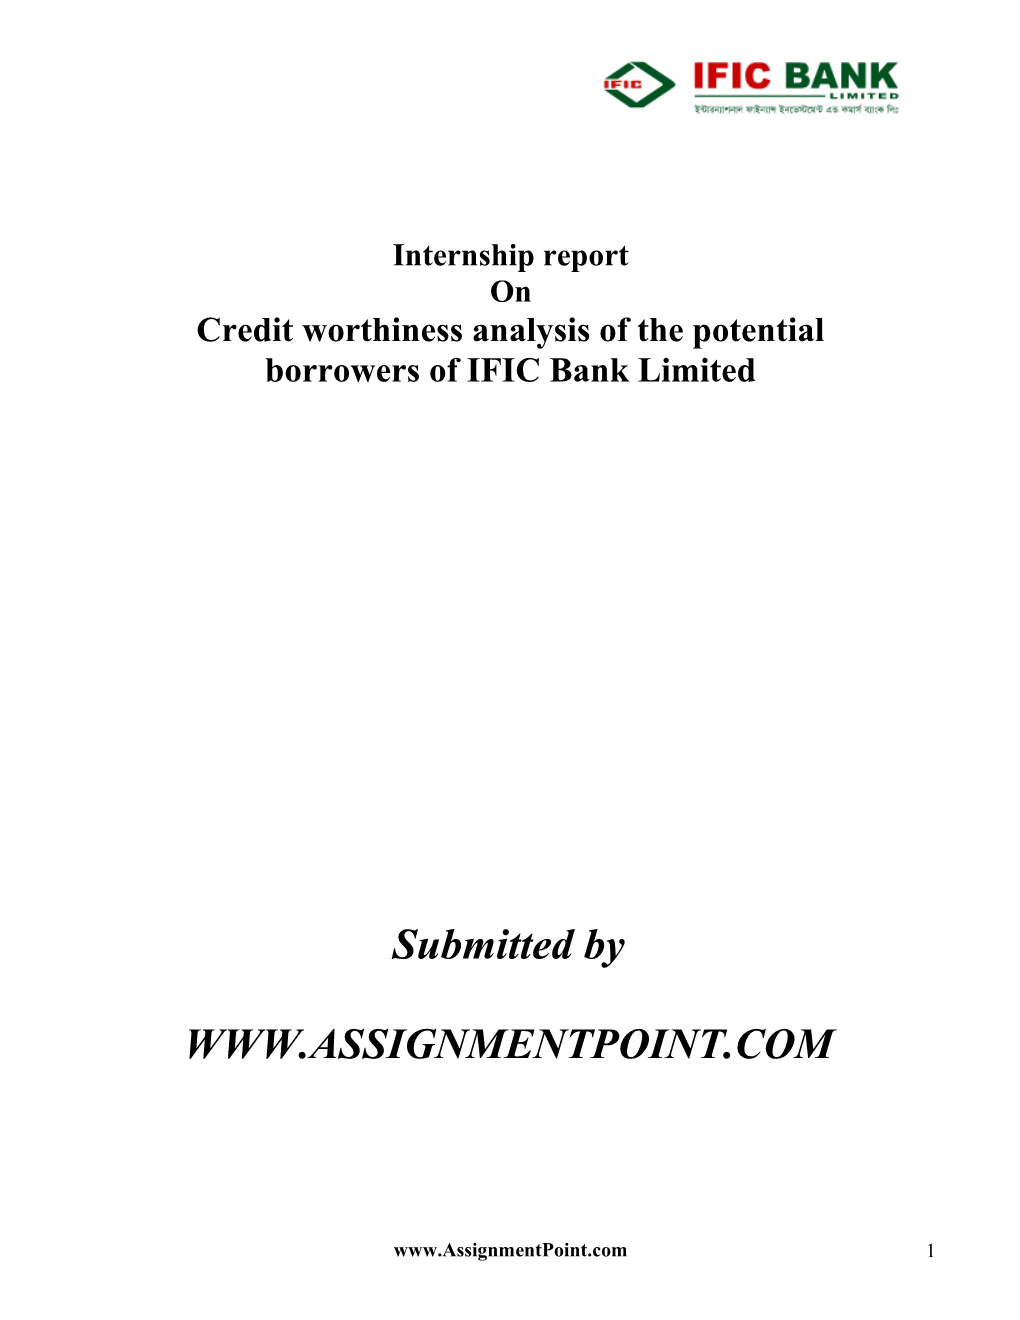 Credit Worthiness Analysis of the Potential Borrowers of IFIC Bank Limited